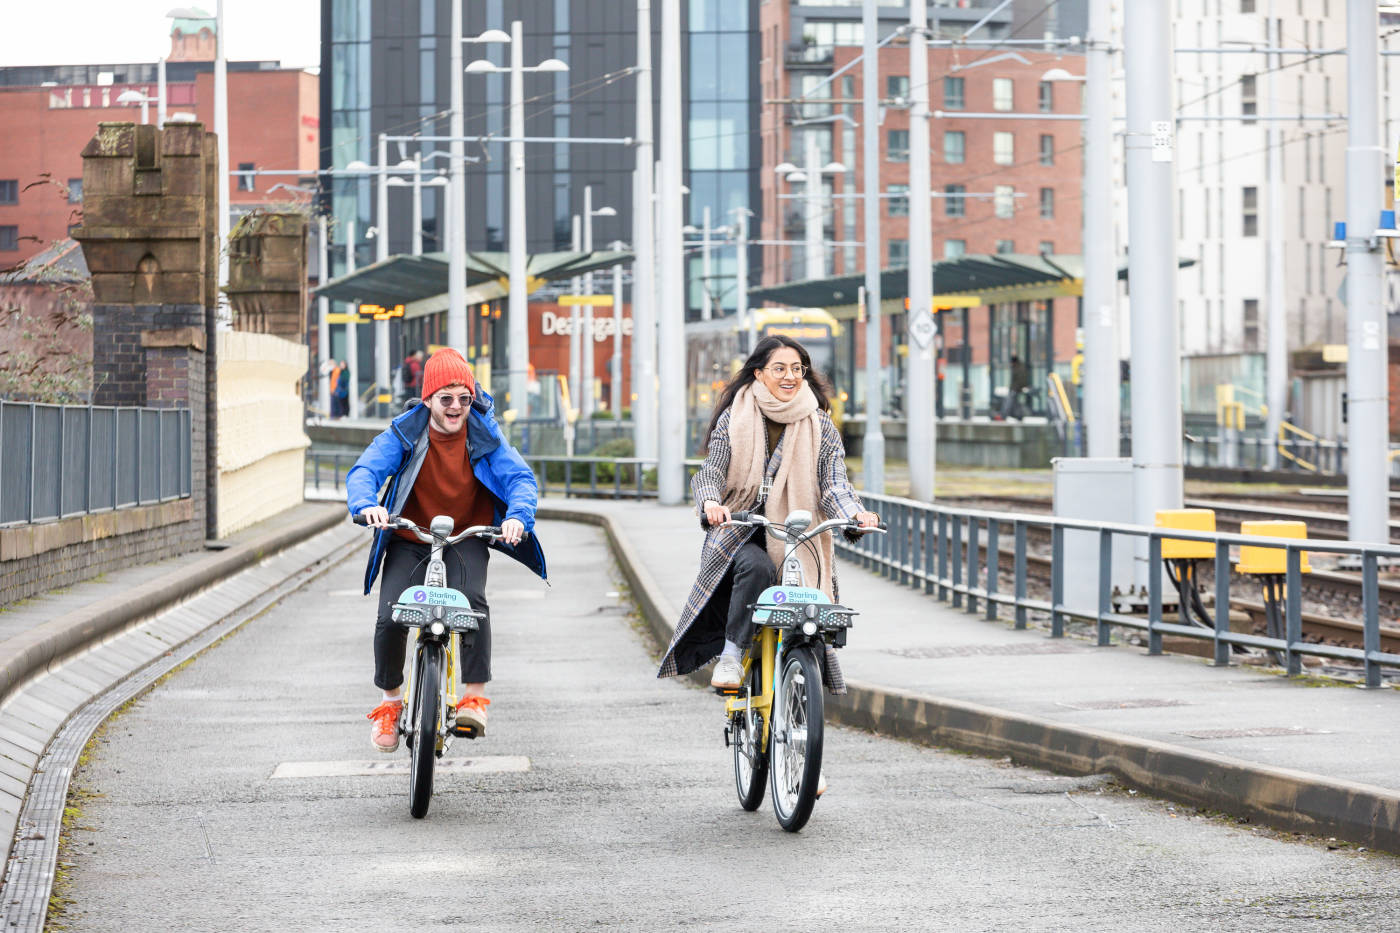 Two cyclists using starling bank bike hire in Manchester